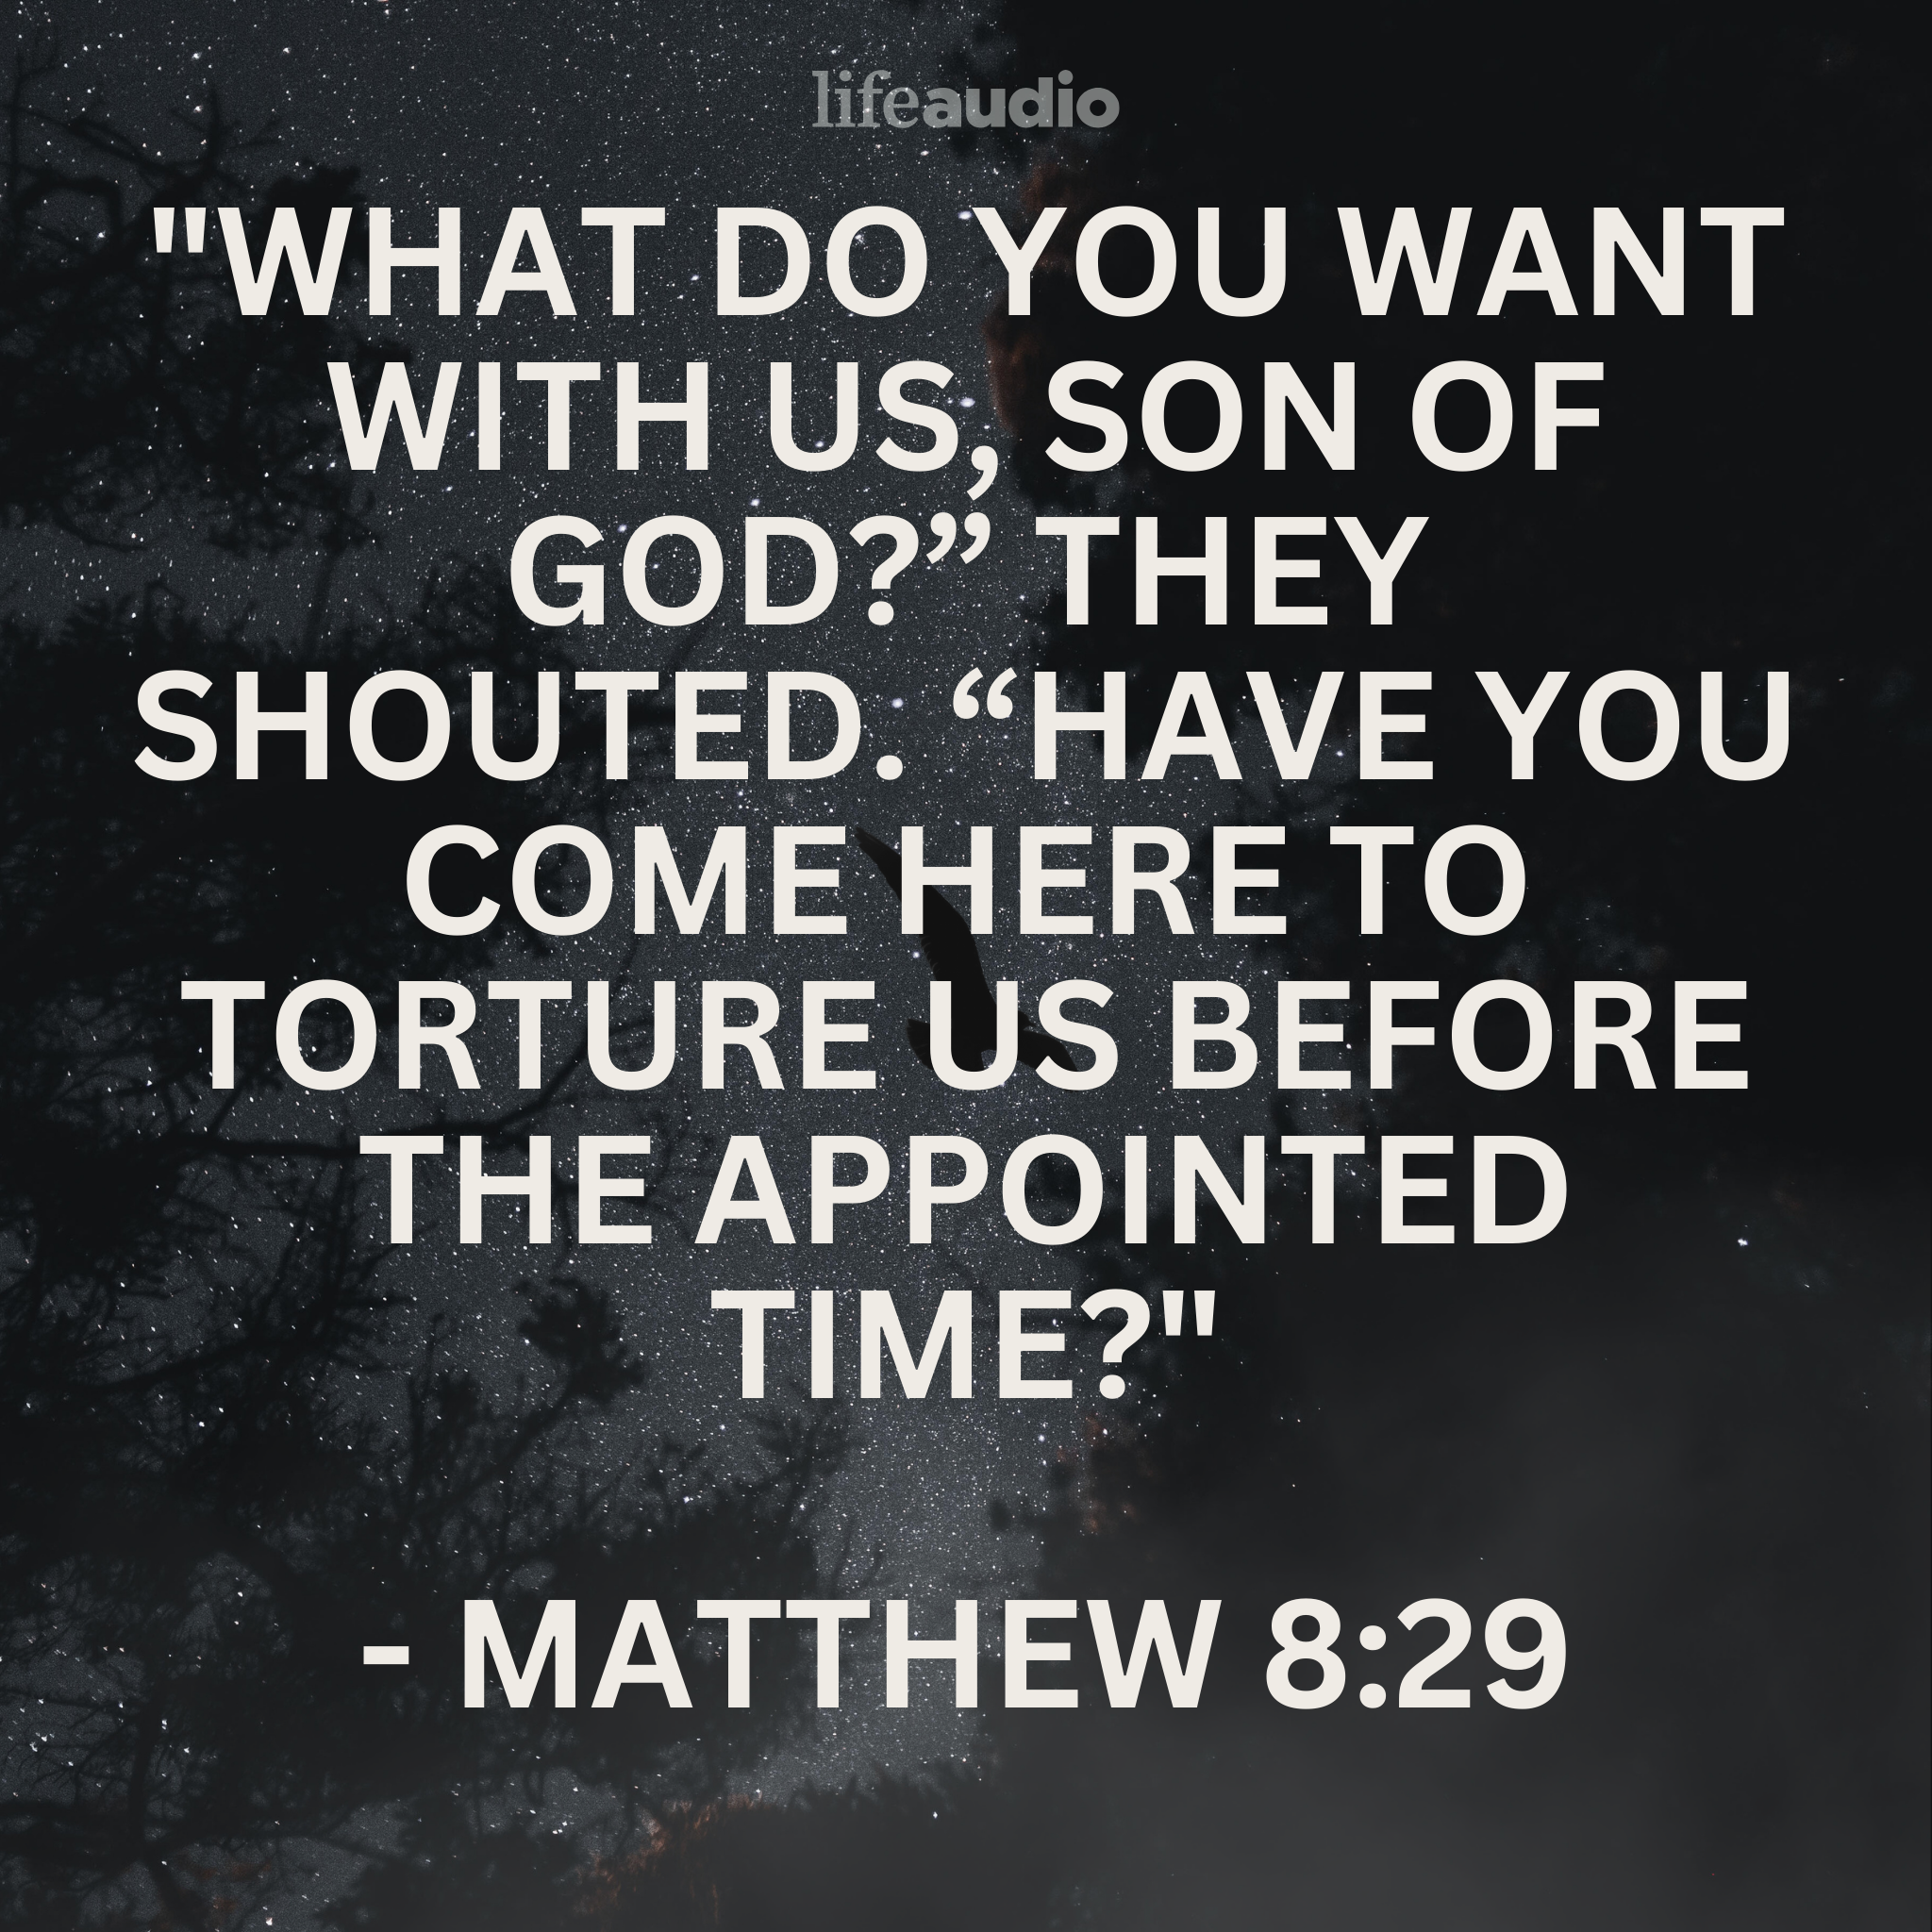 Why We Don't Have to Fear Evil (Matthew 8:29)